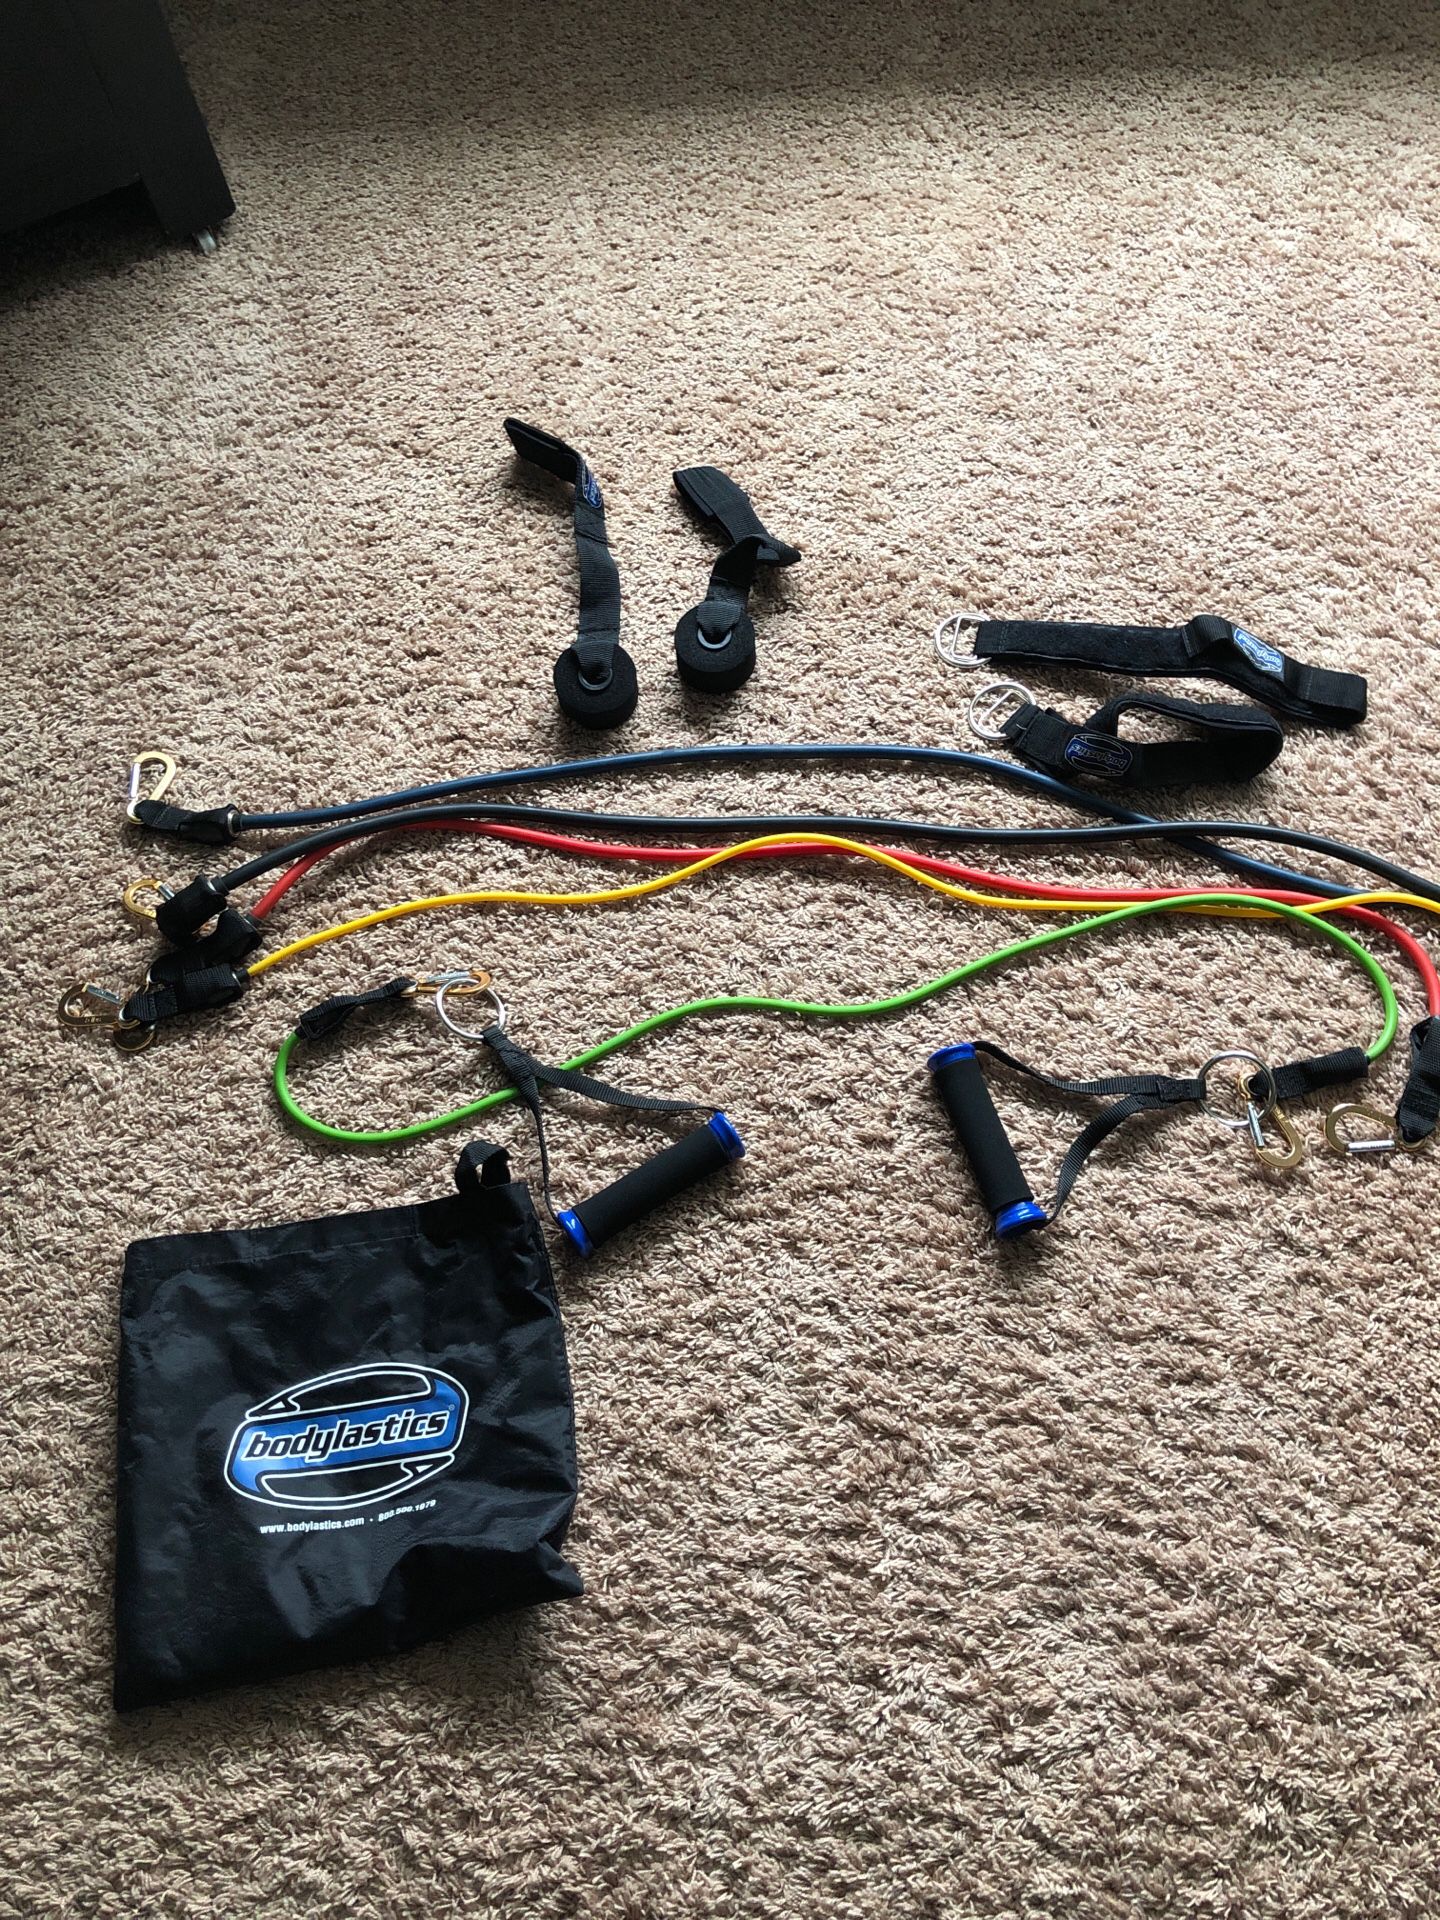 Bodylastic exercise bands